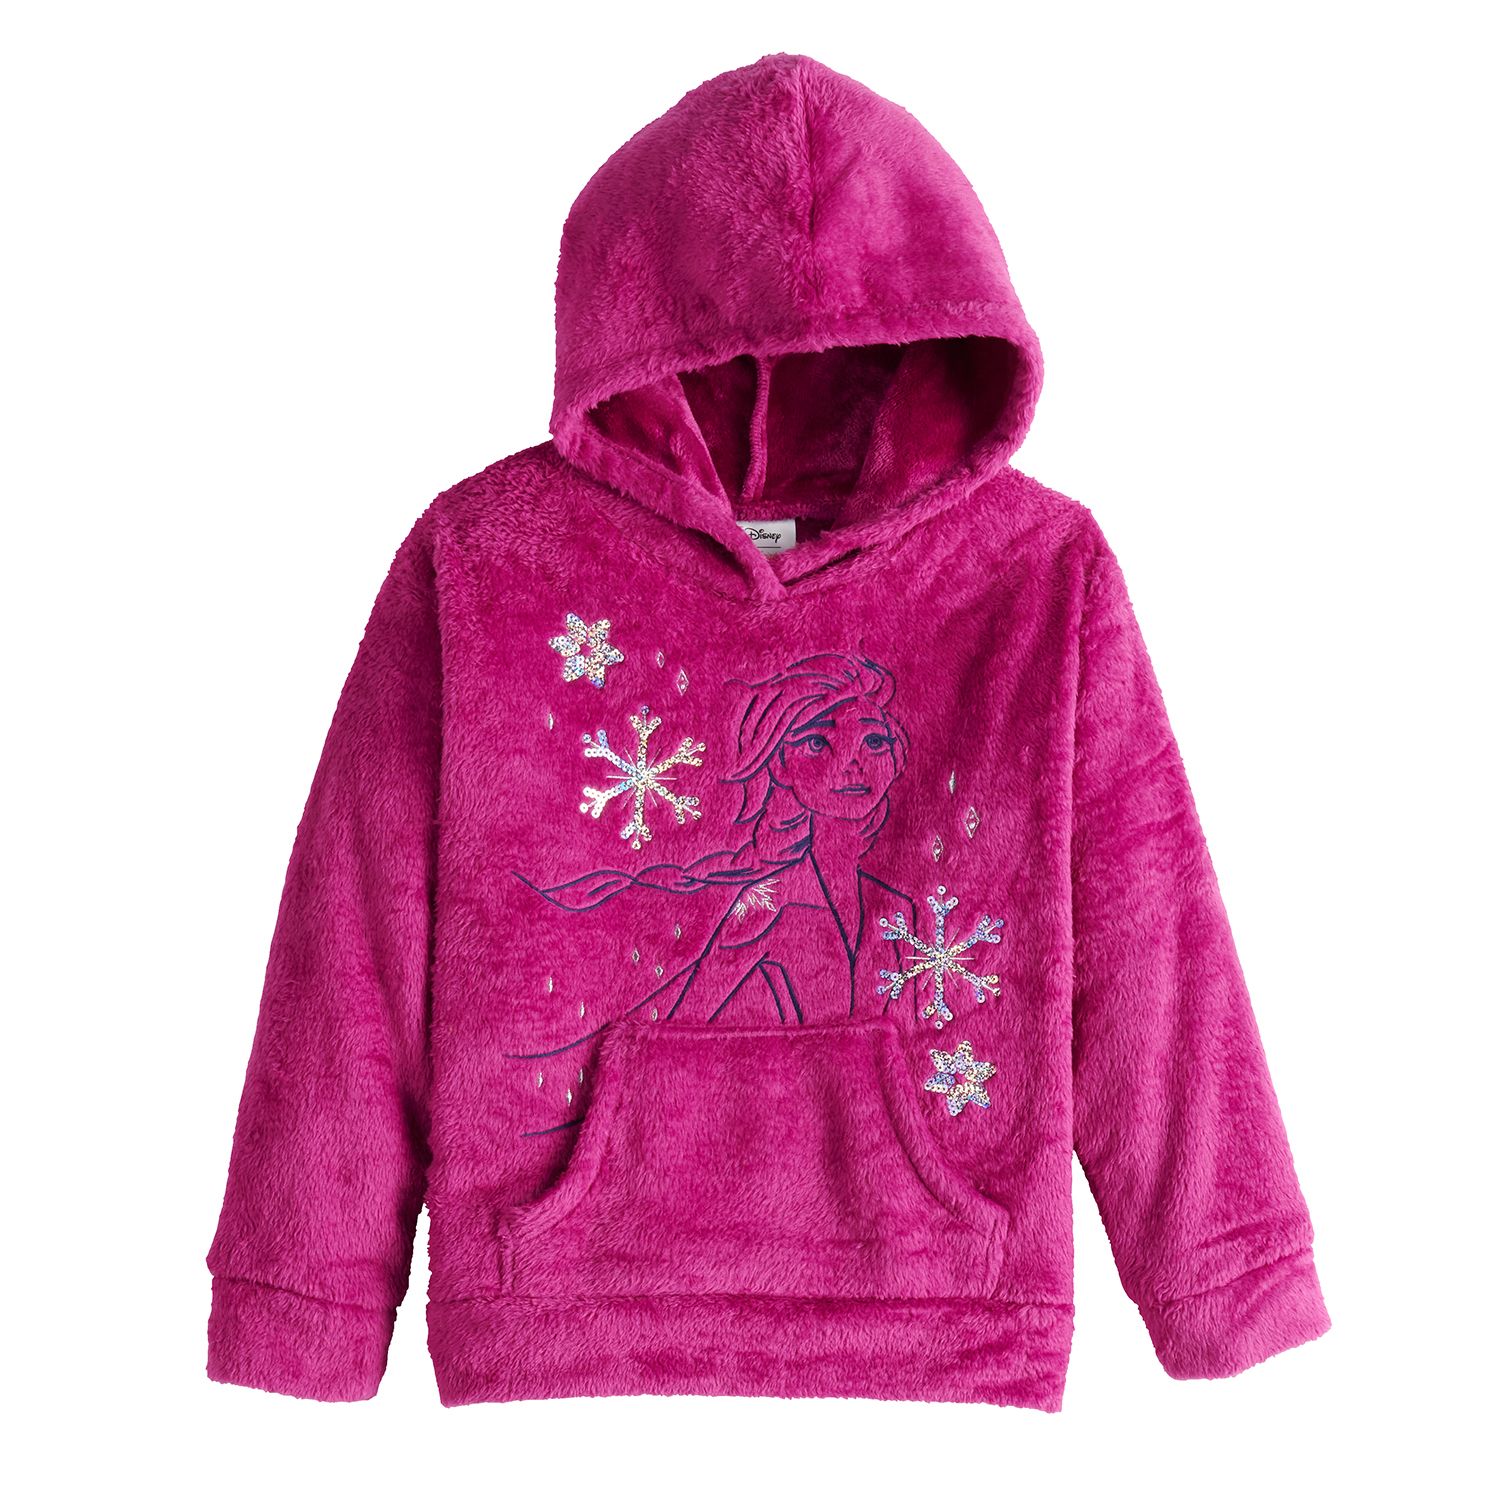 Image for Disney/Jumping Beans Disney's Frozen Elsa Girls 4-12 Sherpa Hoodie by Jumping Beans® at Kohl's.